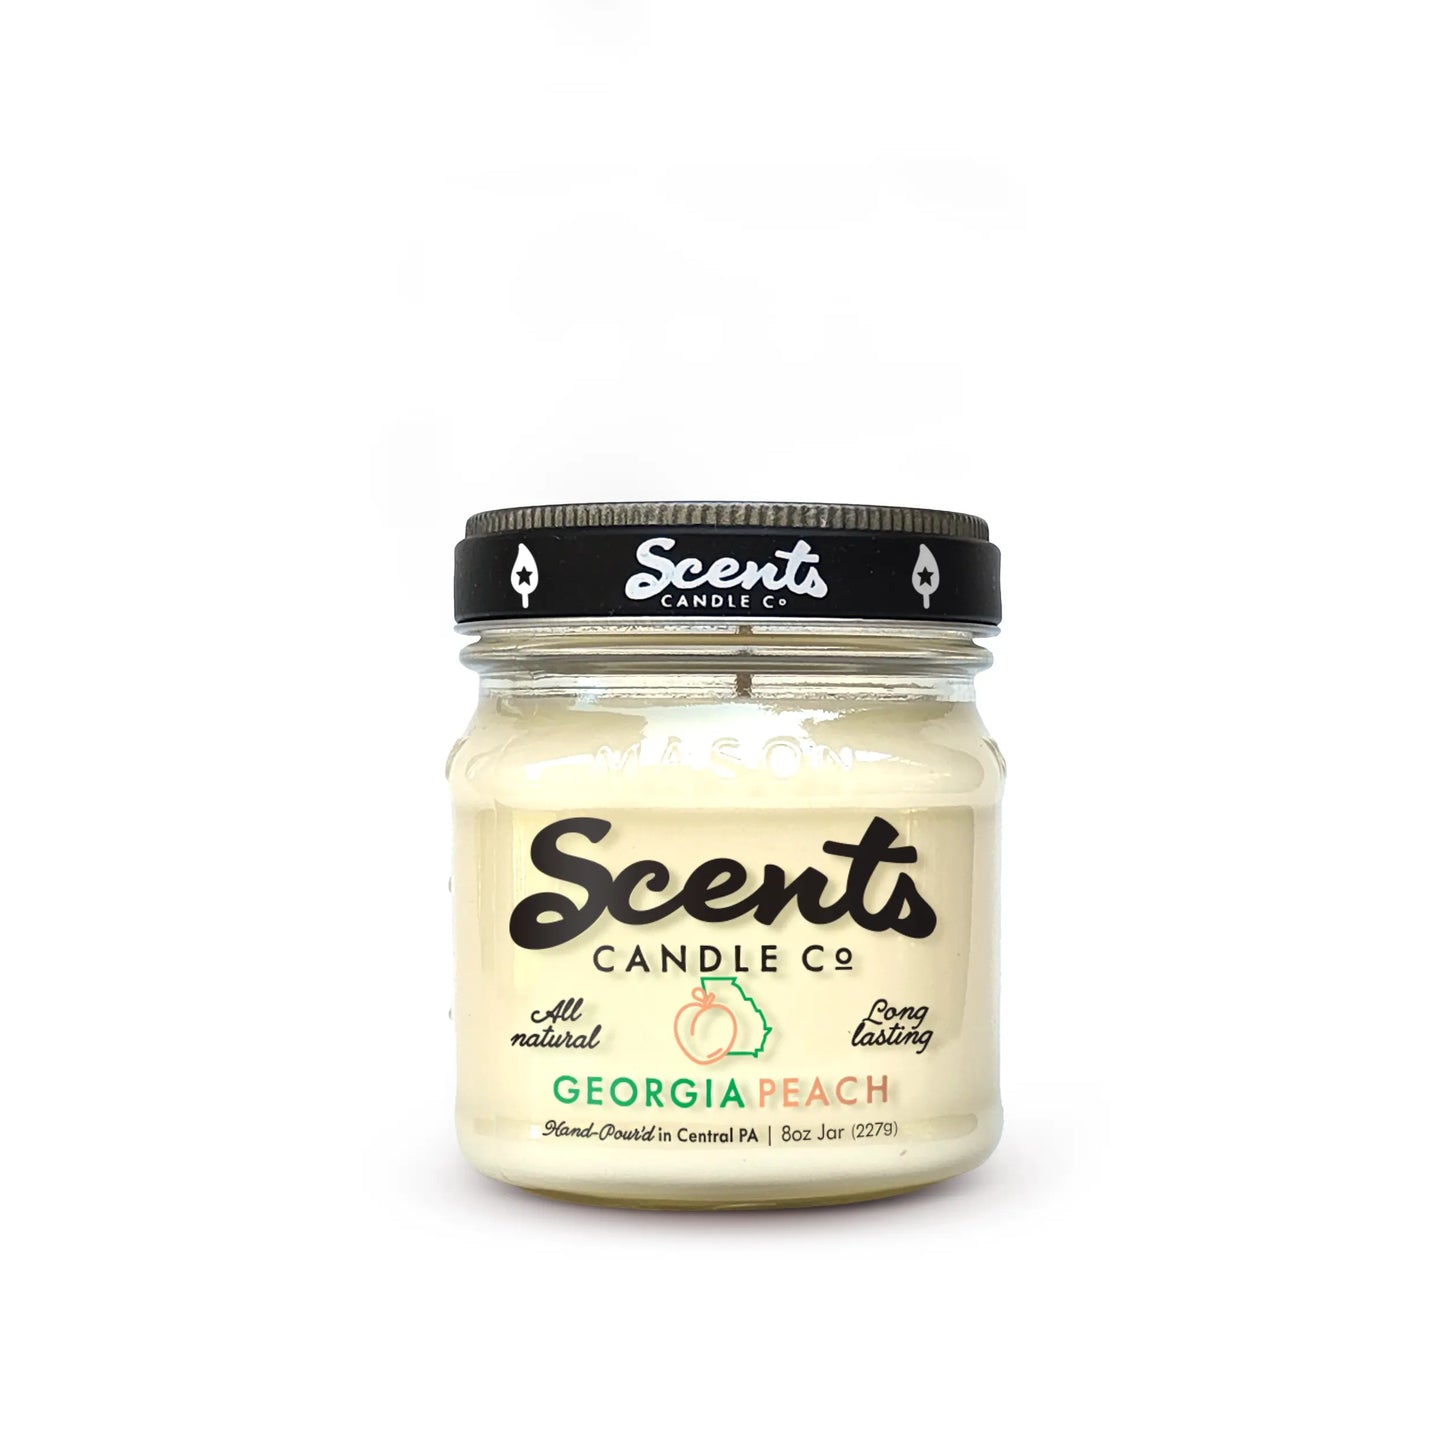 Scents Candle Co. Georgia Peach Soy Wax Candles